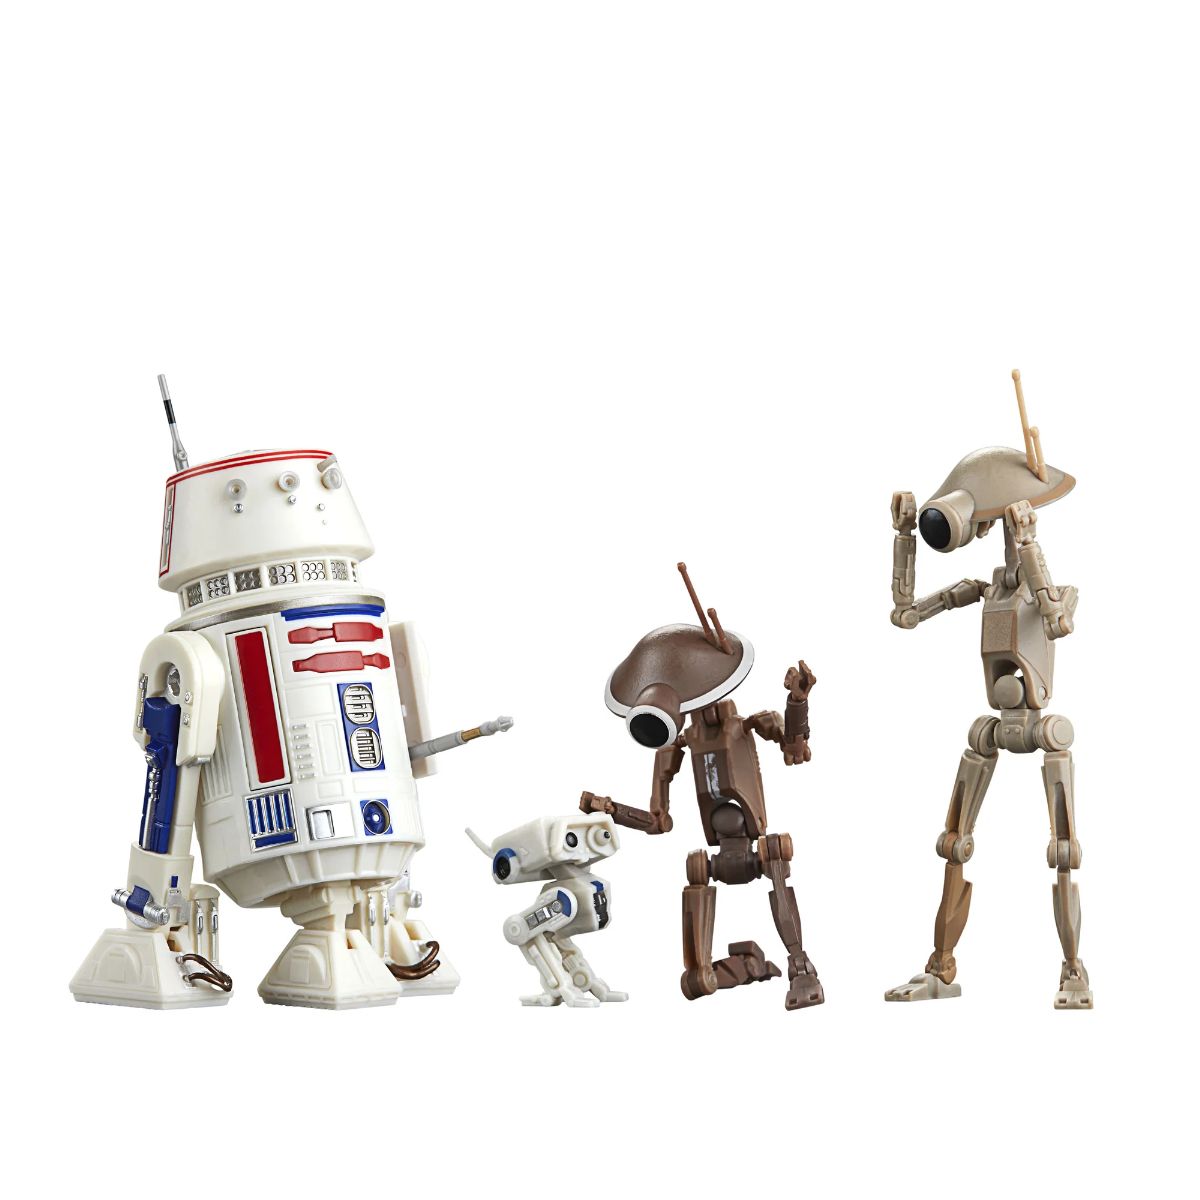 Star Wars TBS tM R5-D4 BD-72 and Pit Droids 6-Inch Action Figure 4-Pack画像